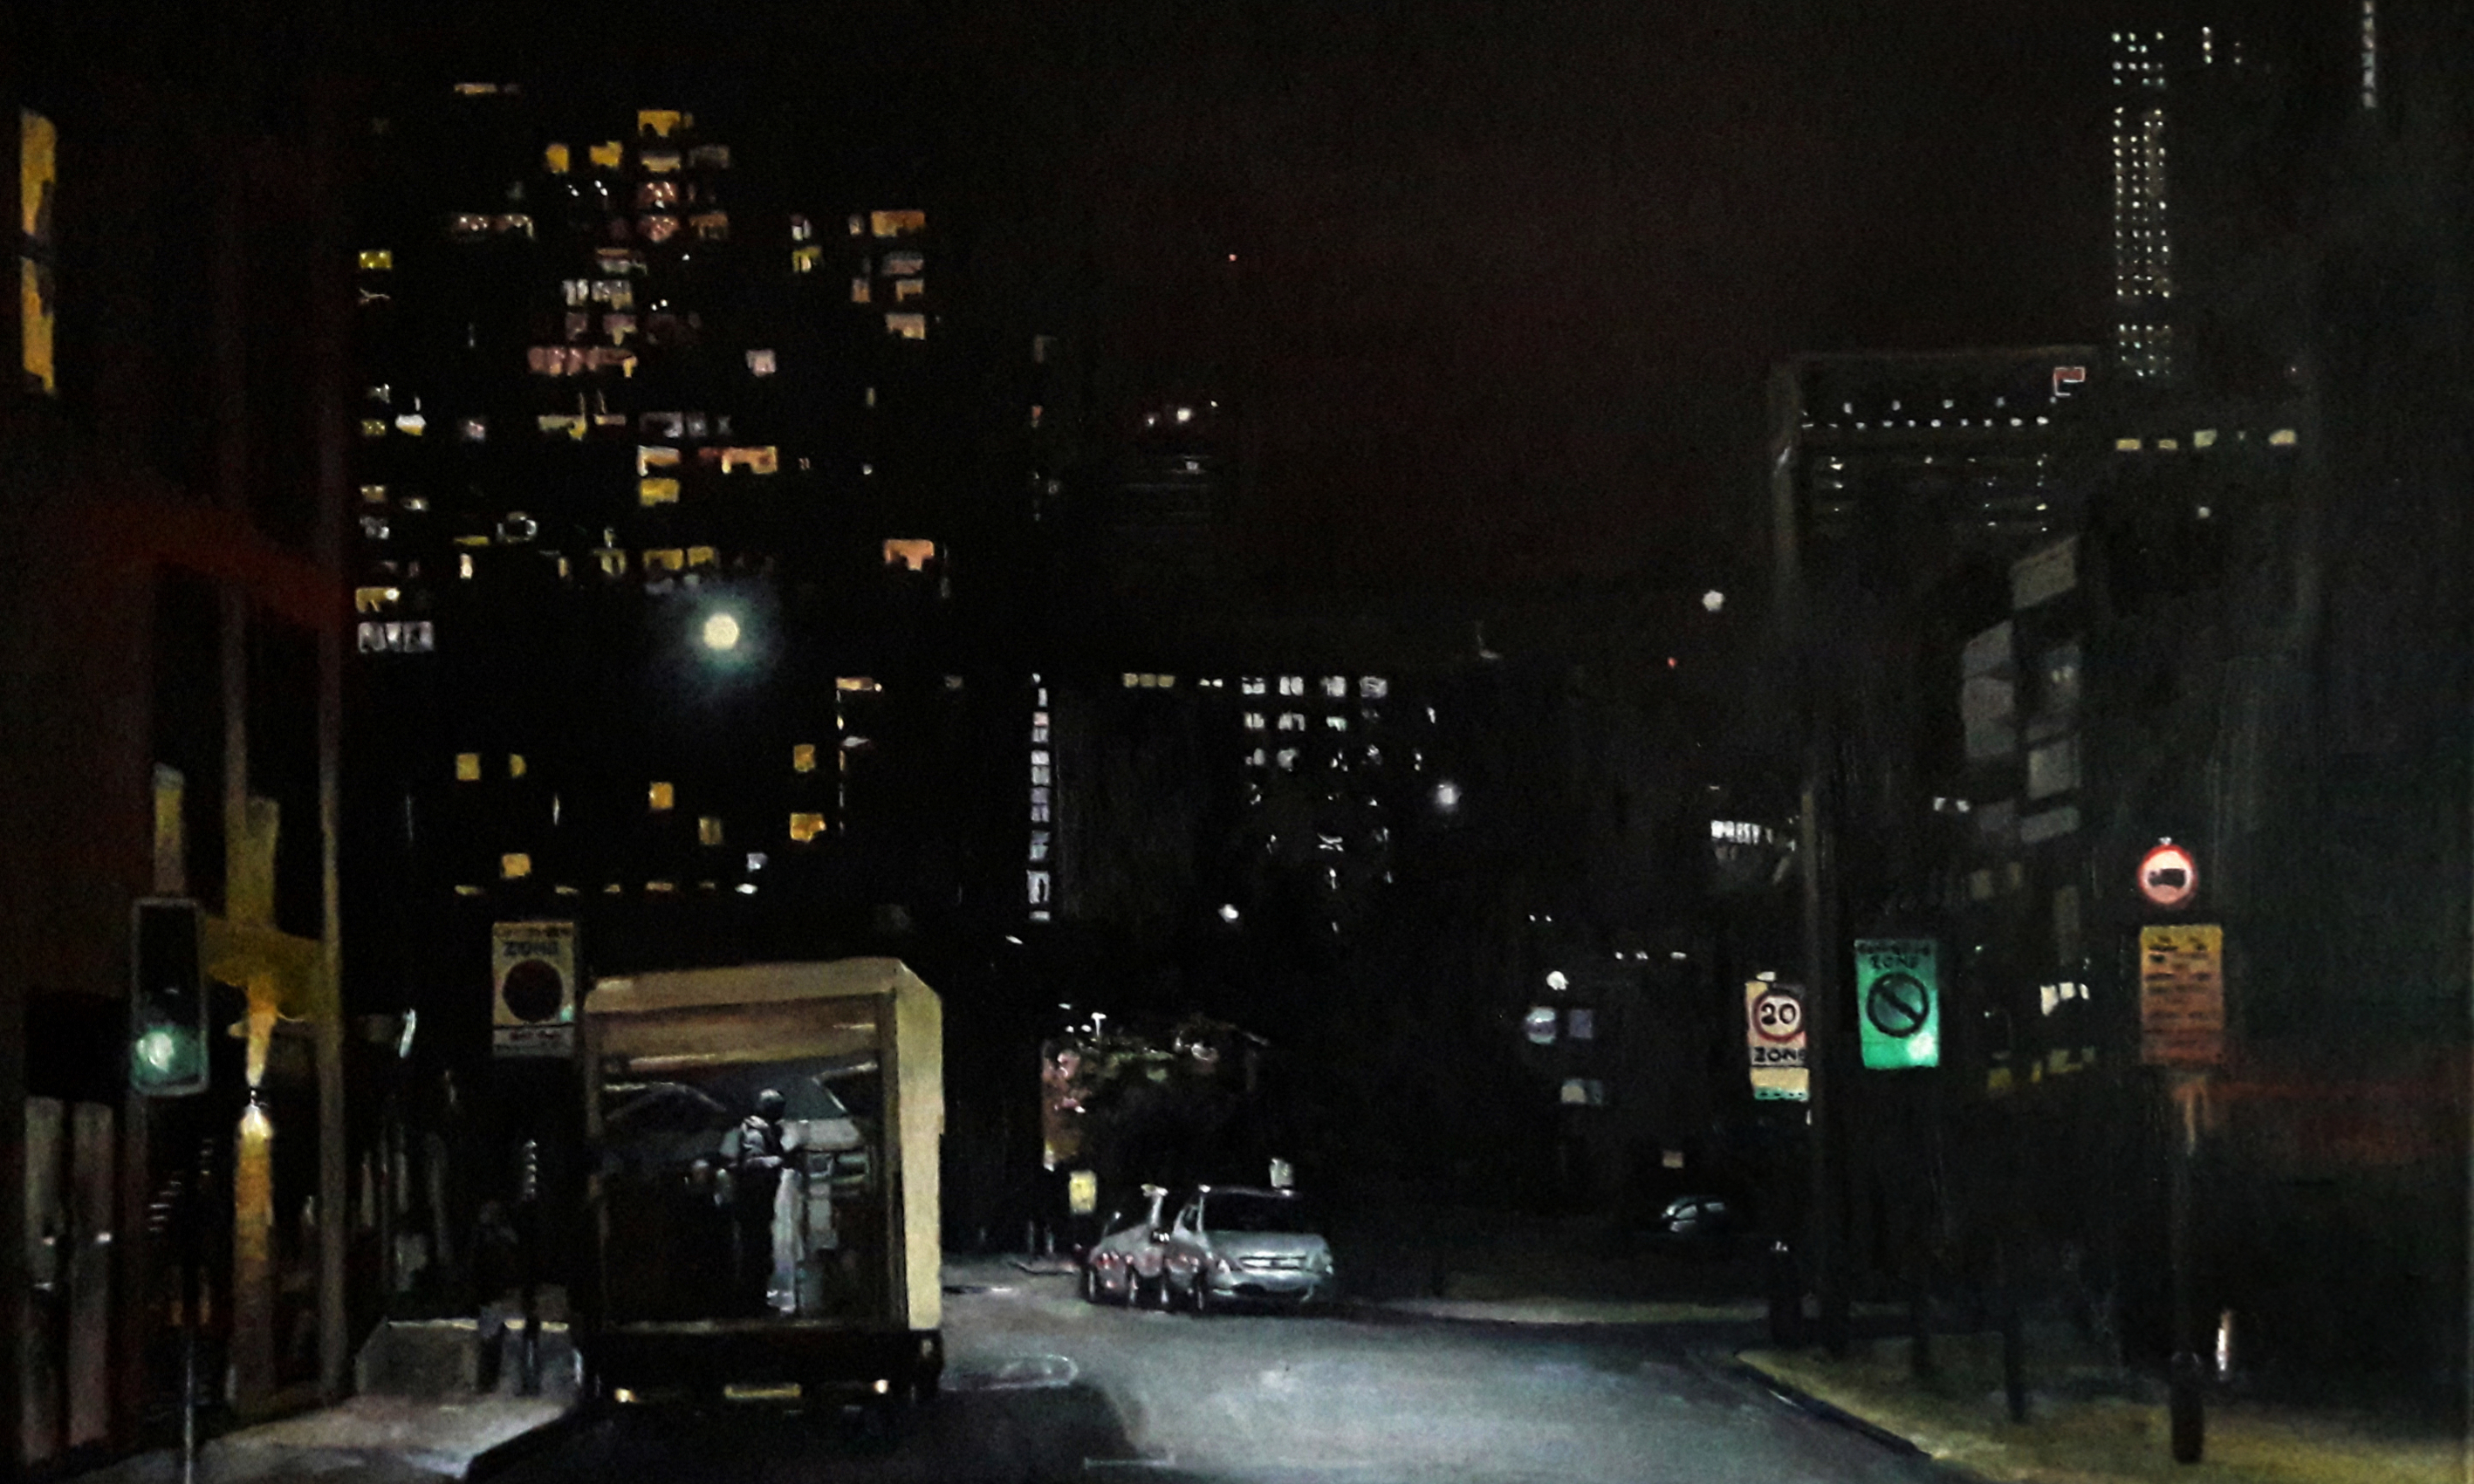 East India Dock Road 8.10pm oil on canvas
            80 x 100 cm